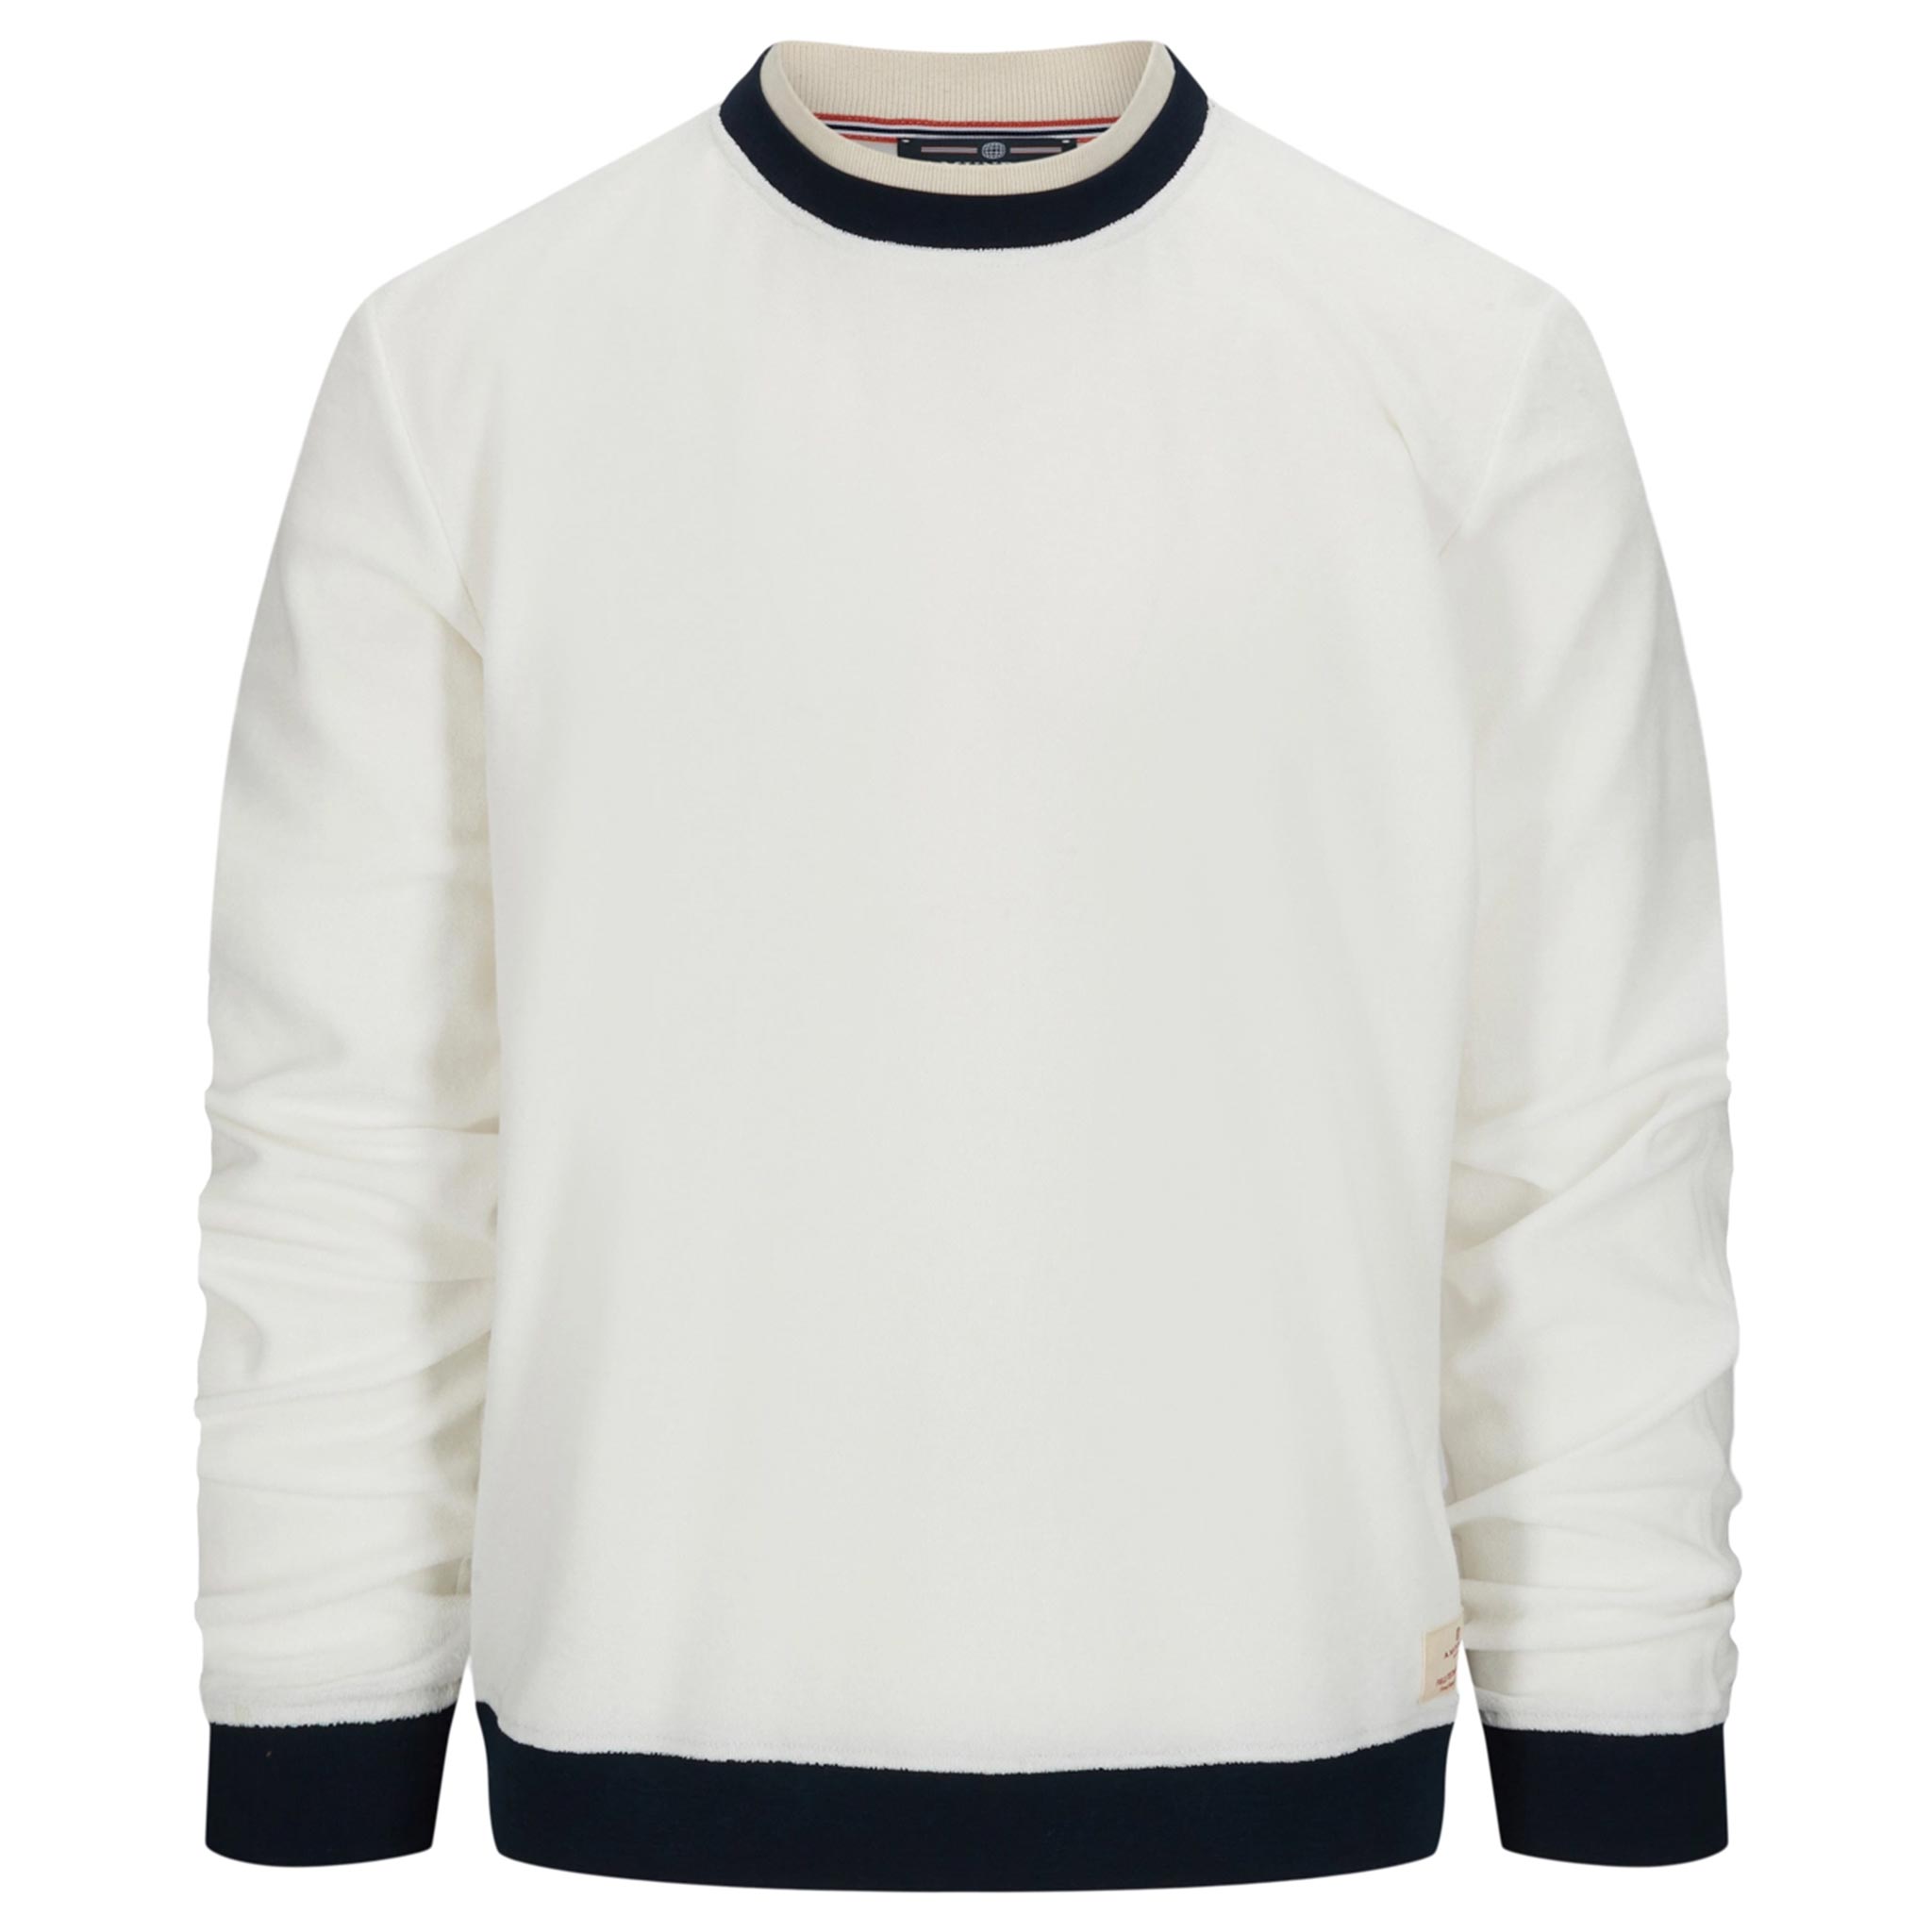 Odd Terry Long Sleeve in Natural